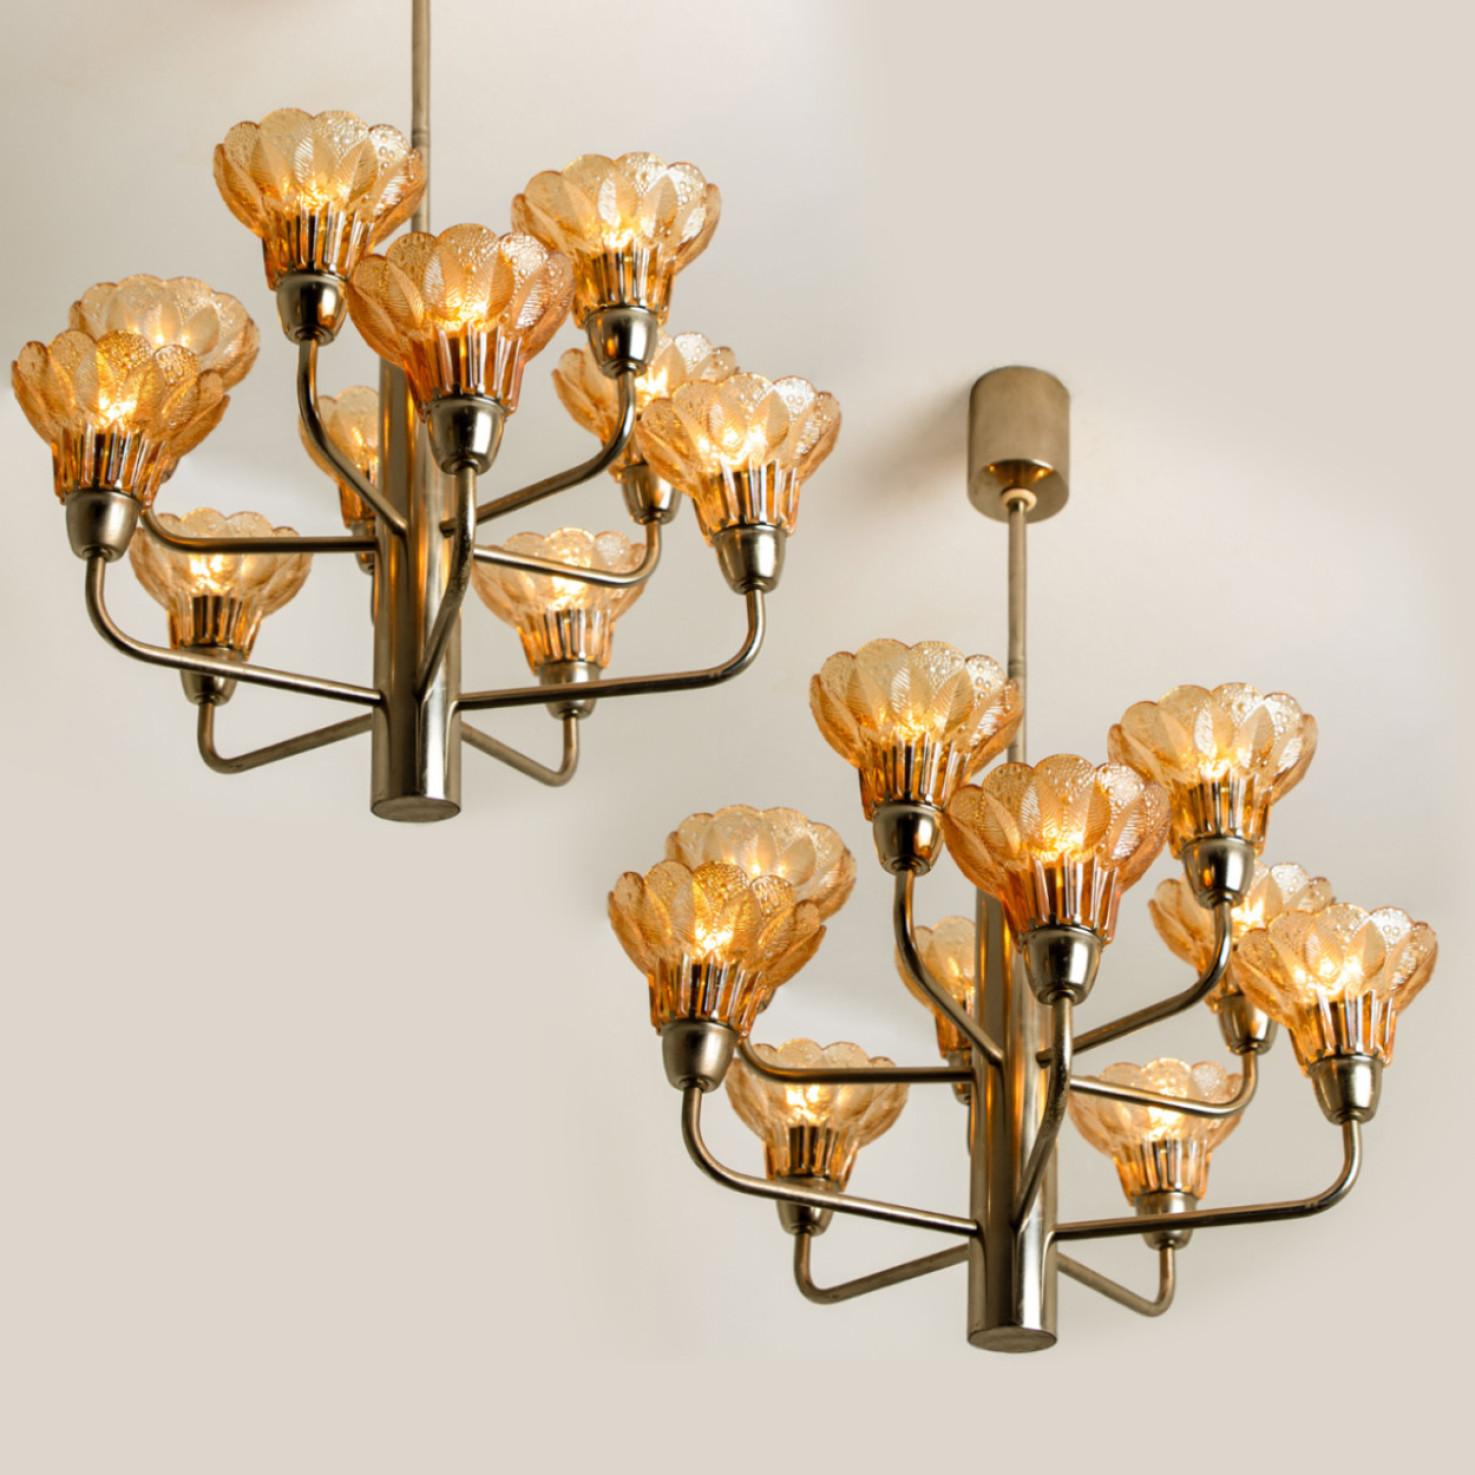 This ceiling light was designed by Simon and Schelle, featuring a rectangular chrome base and four massive glasses in the shape of a four lobed flower.

Dimensions:
Height only the fixture 13,8 inch (35 cm) overall height 26 inch (66 cm)
diameter